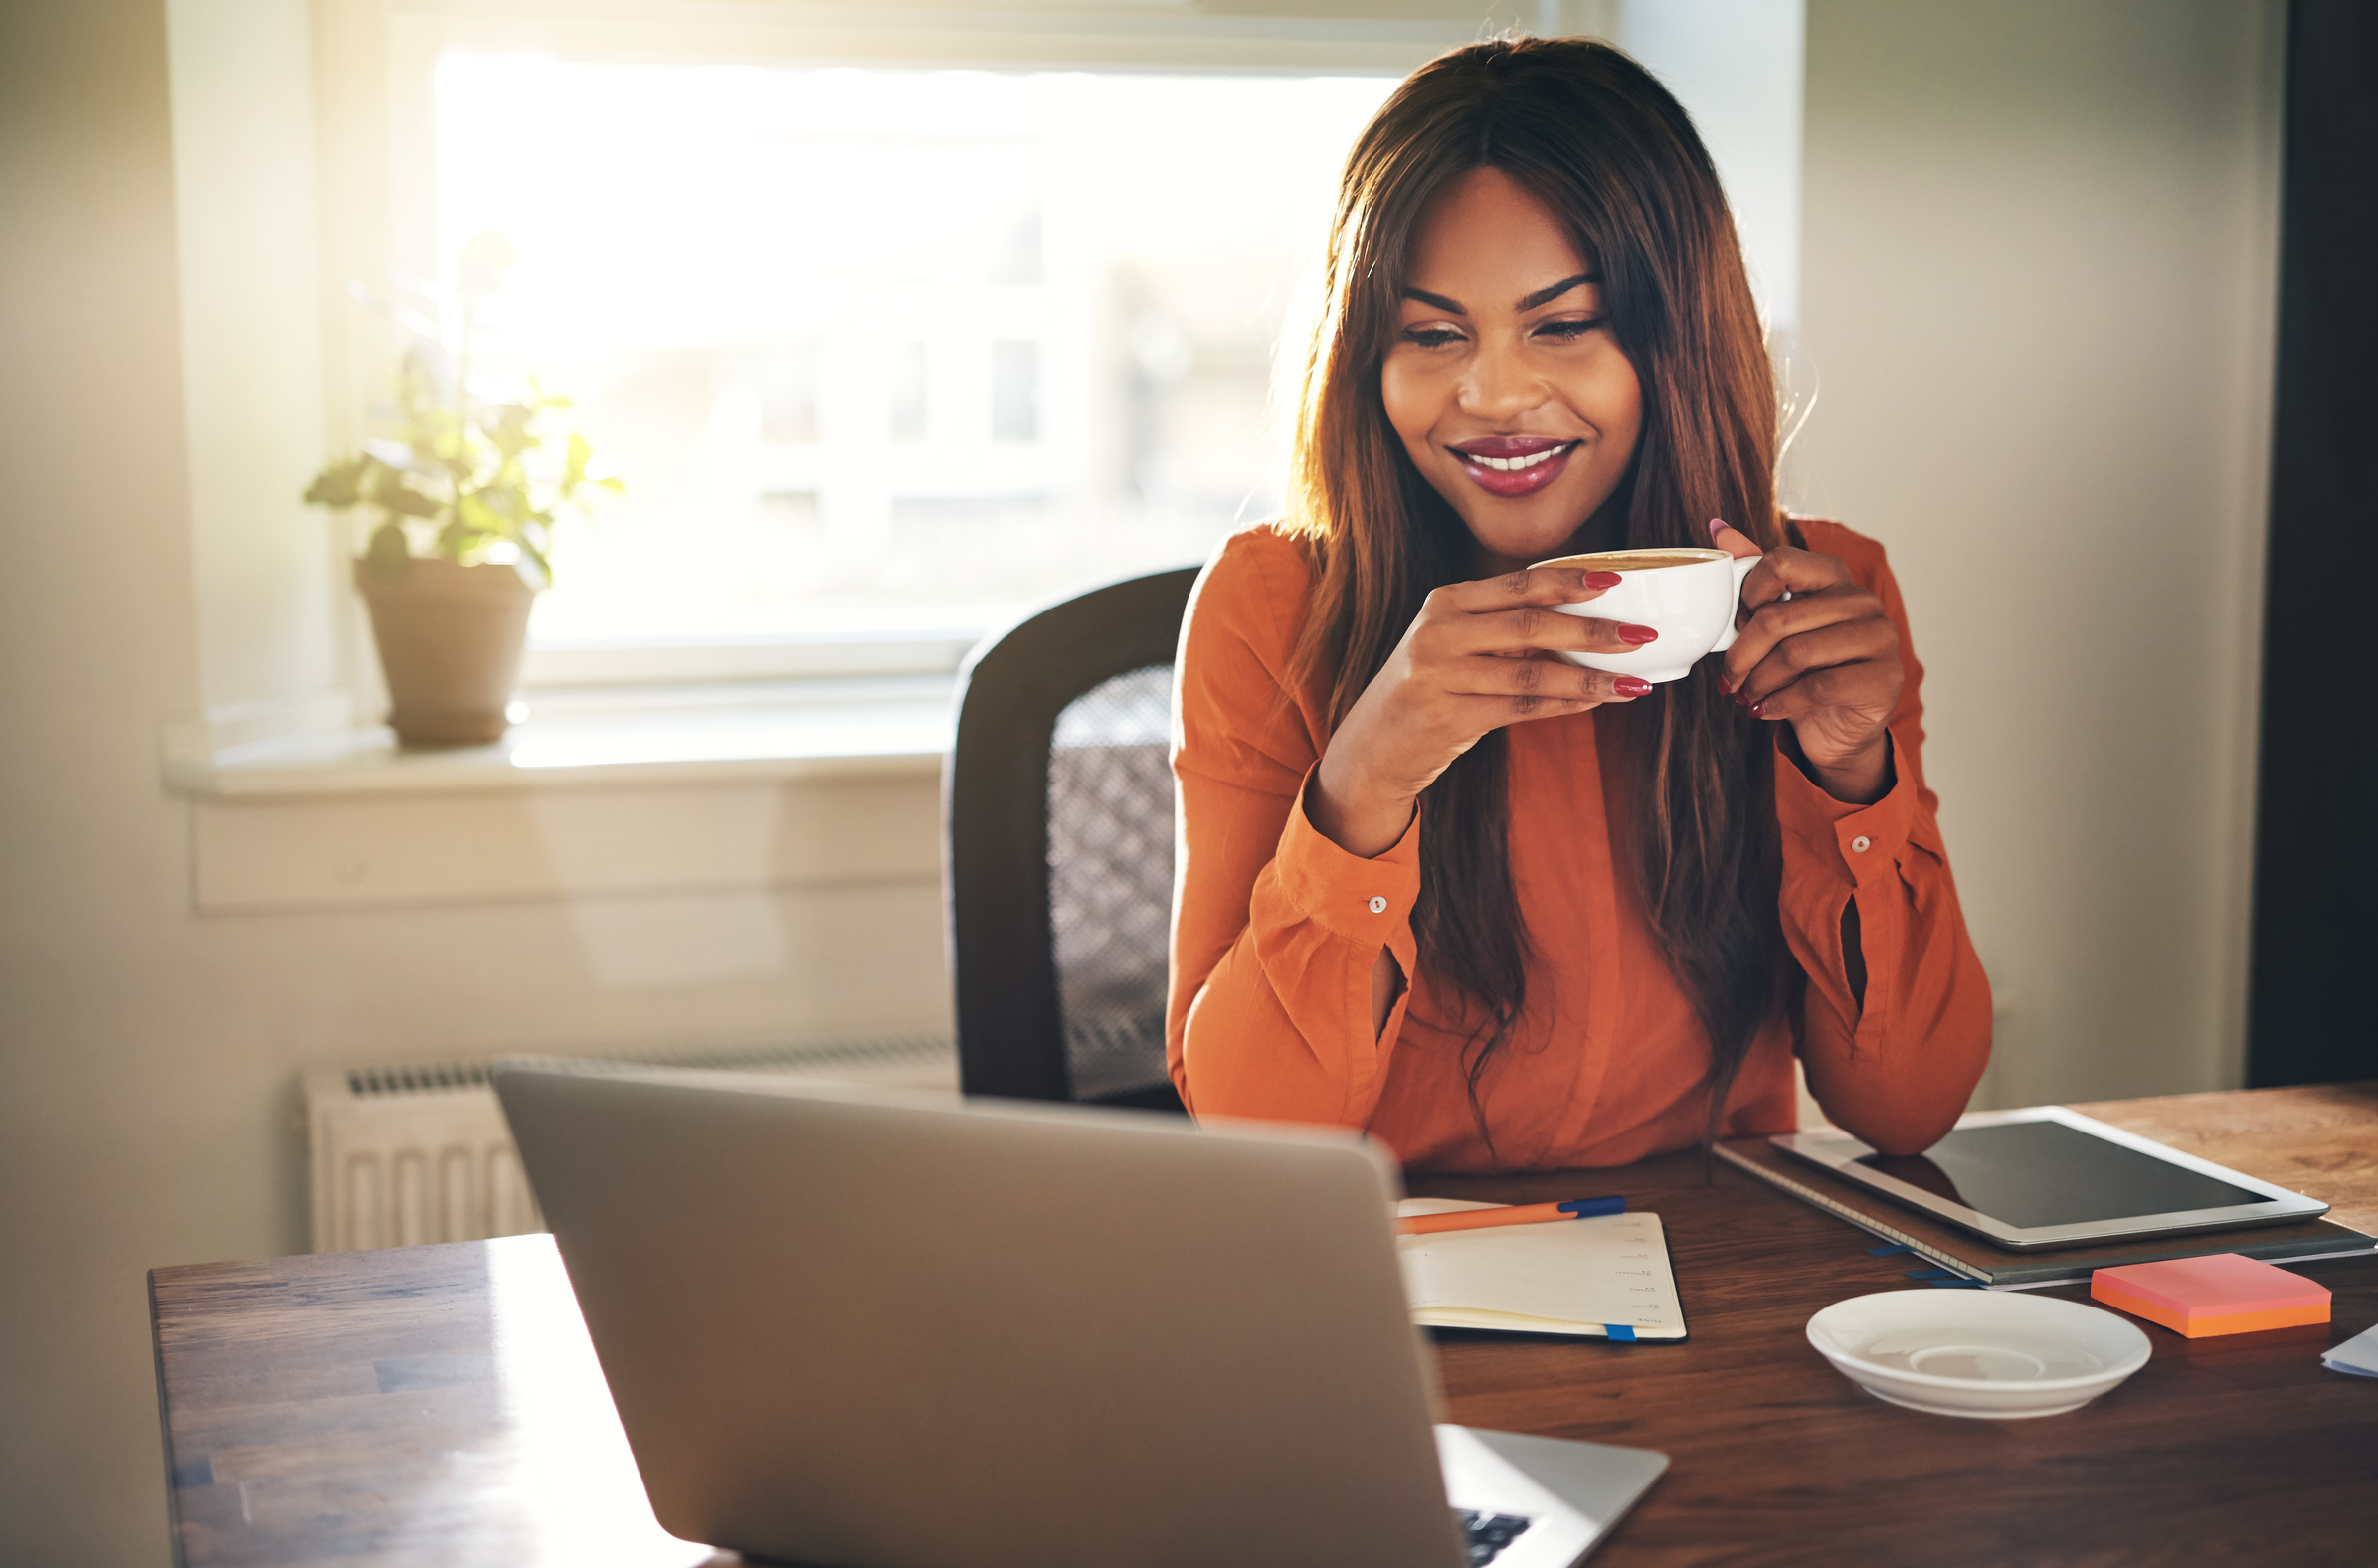 Smiling young woman drinking coffee while working from home